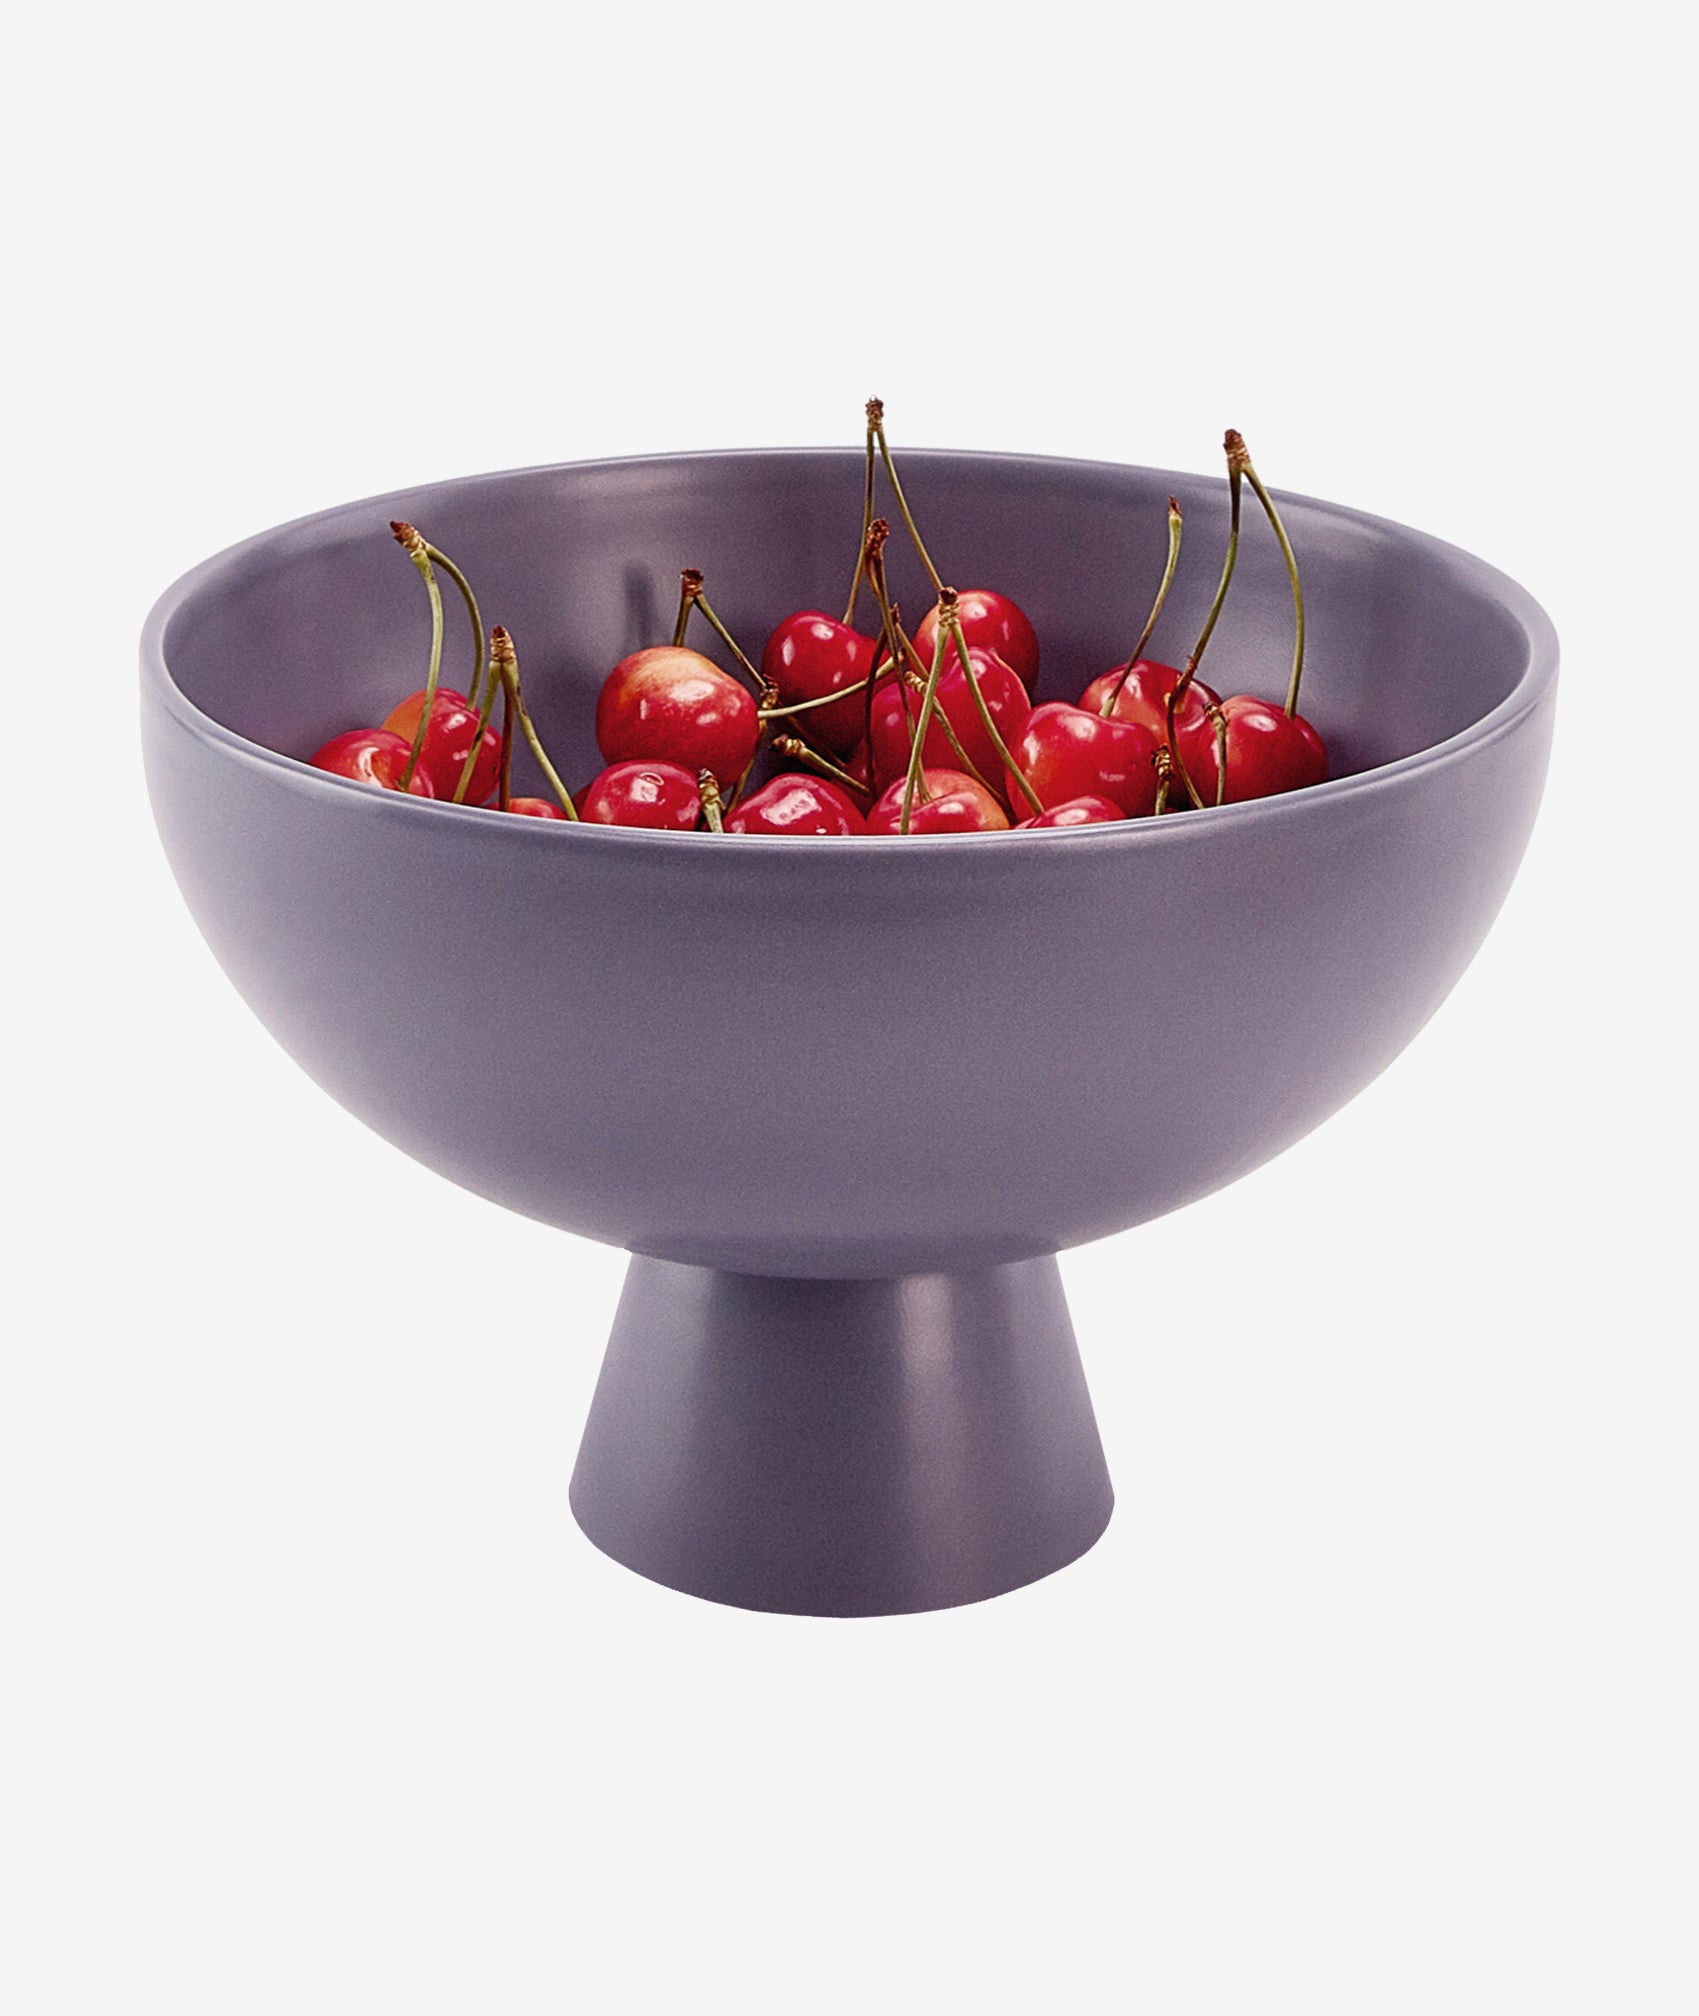 Raawii Strom Bowl Large - 7 Colors Raawii - BEAM // Design Store